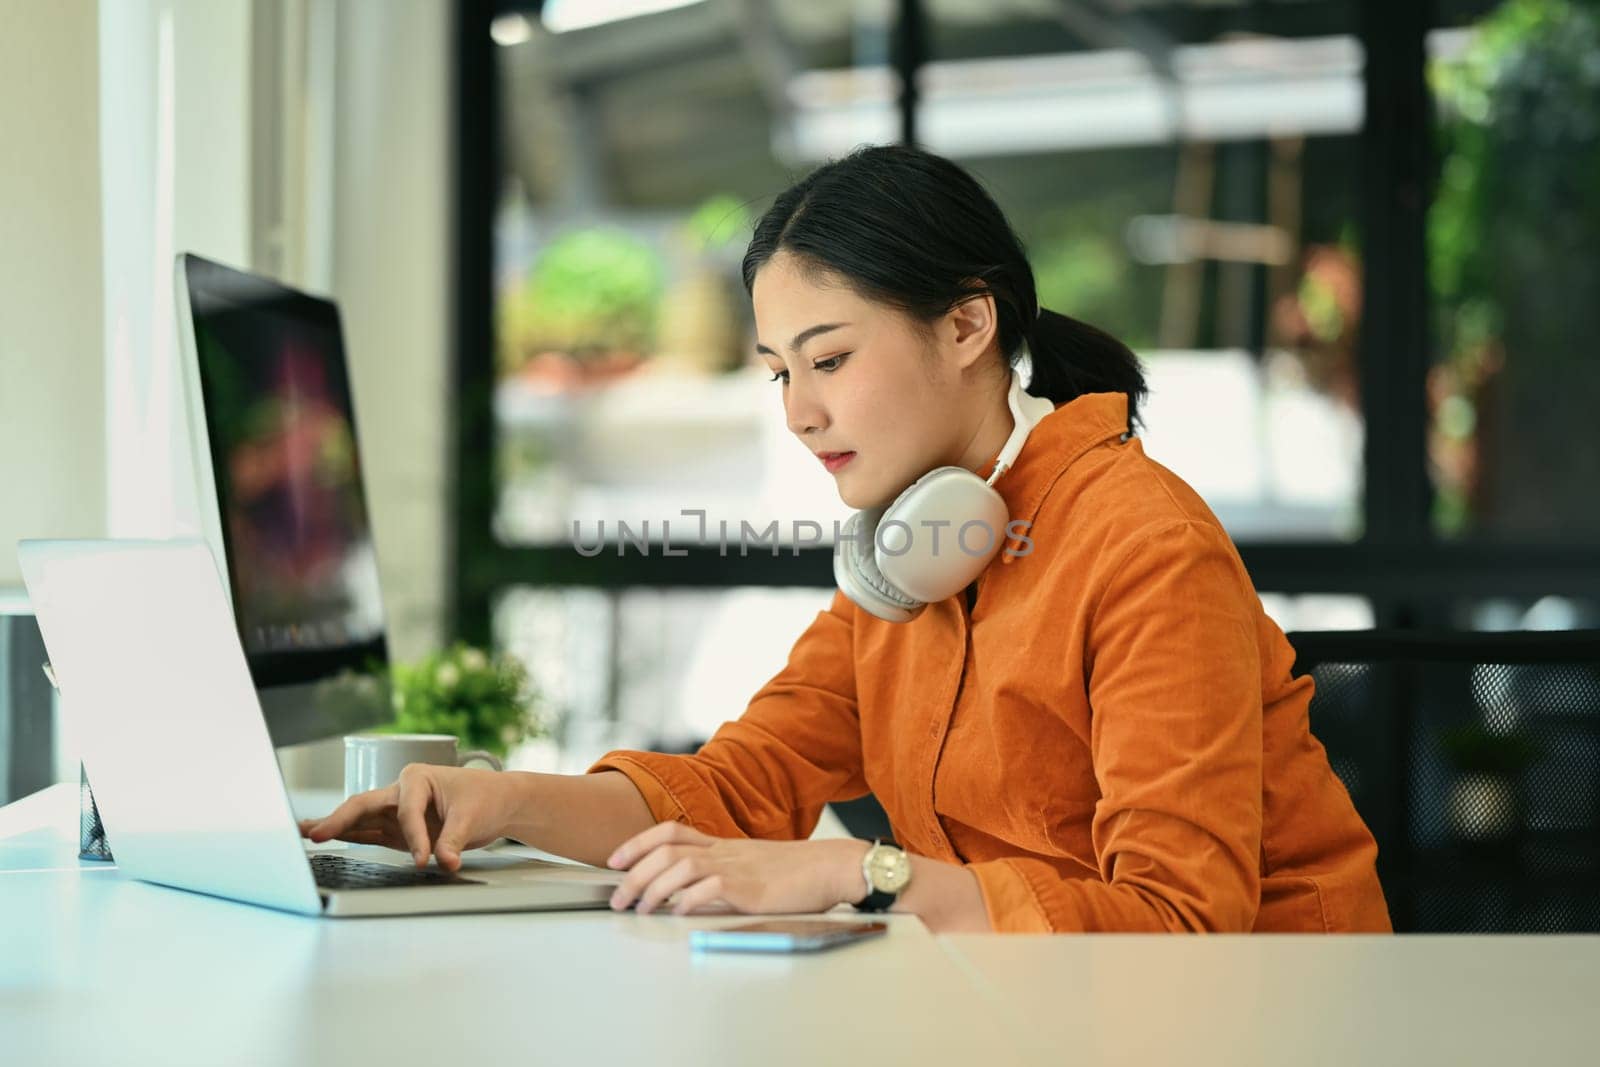 Focused young creative woman with headphone on her neck working on laptop at modern office by prathanchorruangsak